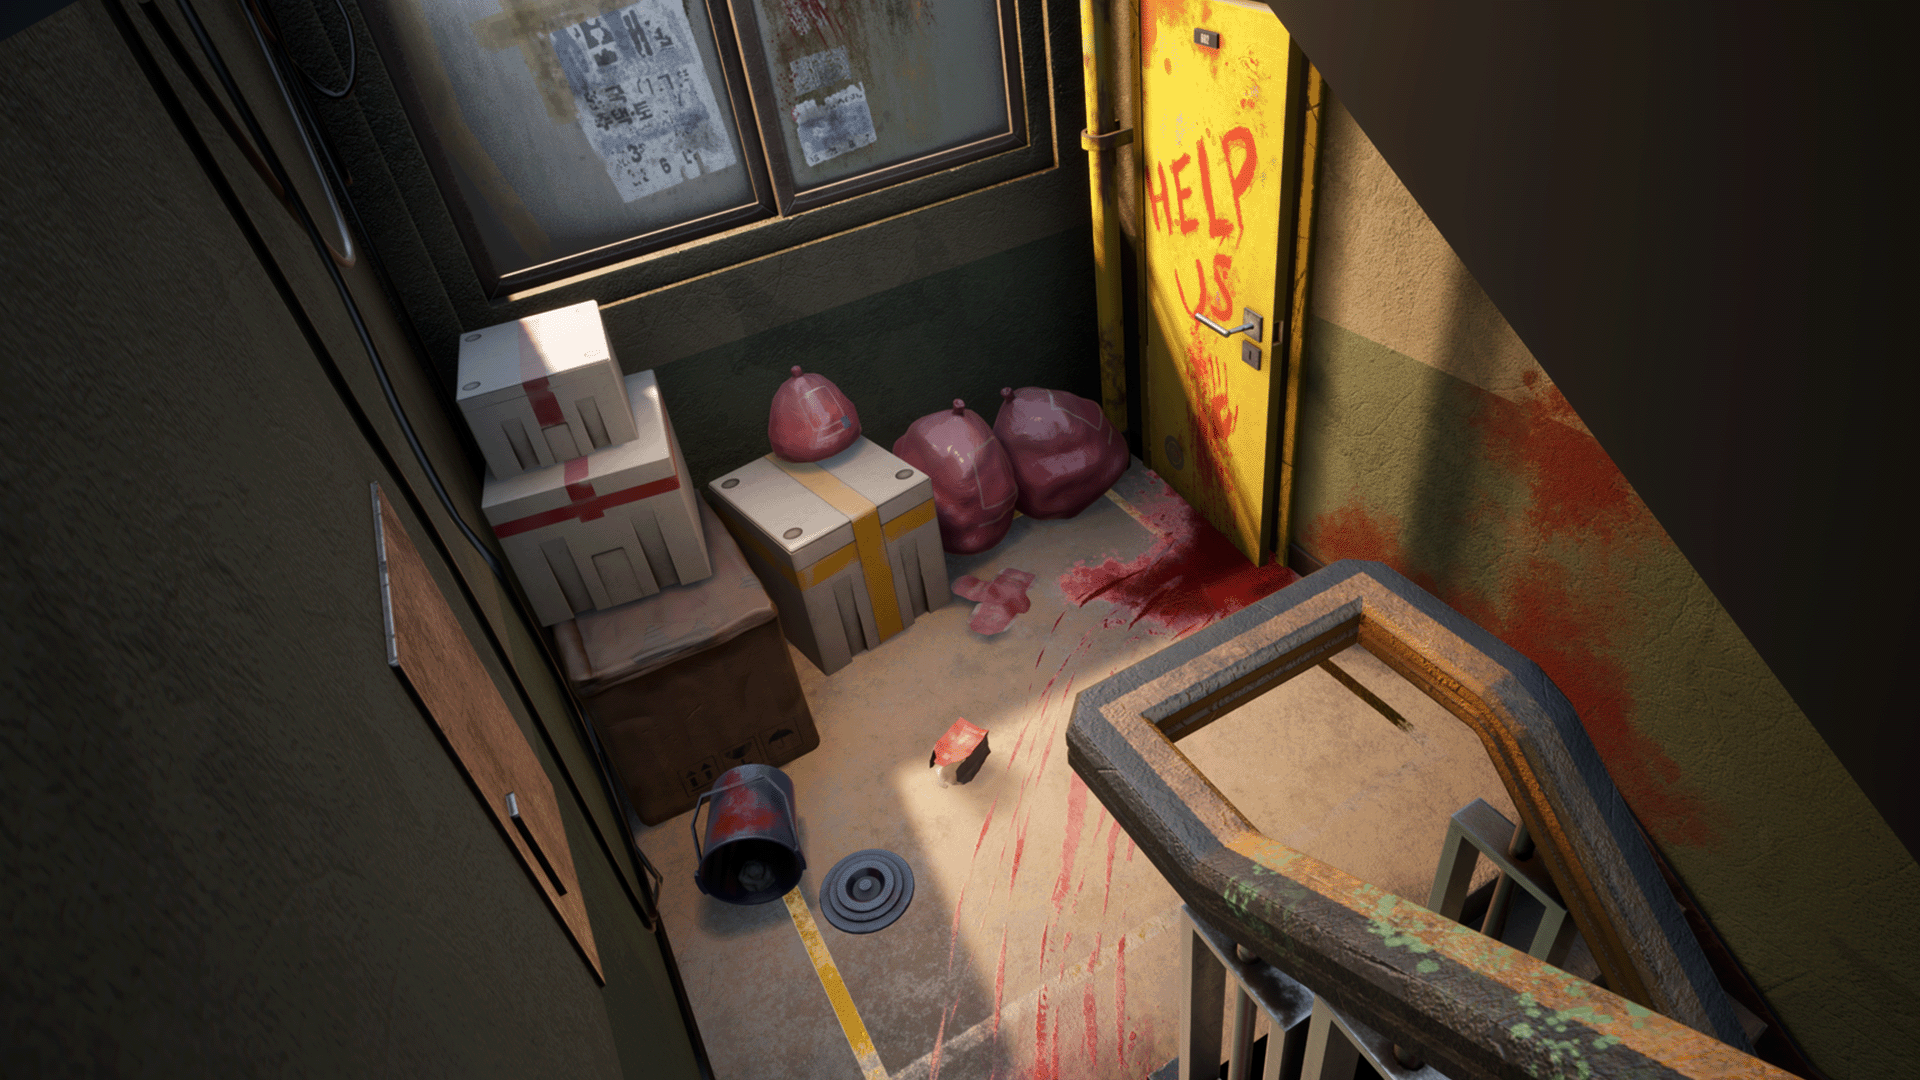 A 3D modelled scene of an ominous abandoned stairwell with blood trailing towards a yellow door with the words Help Us on it with a handprint.